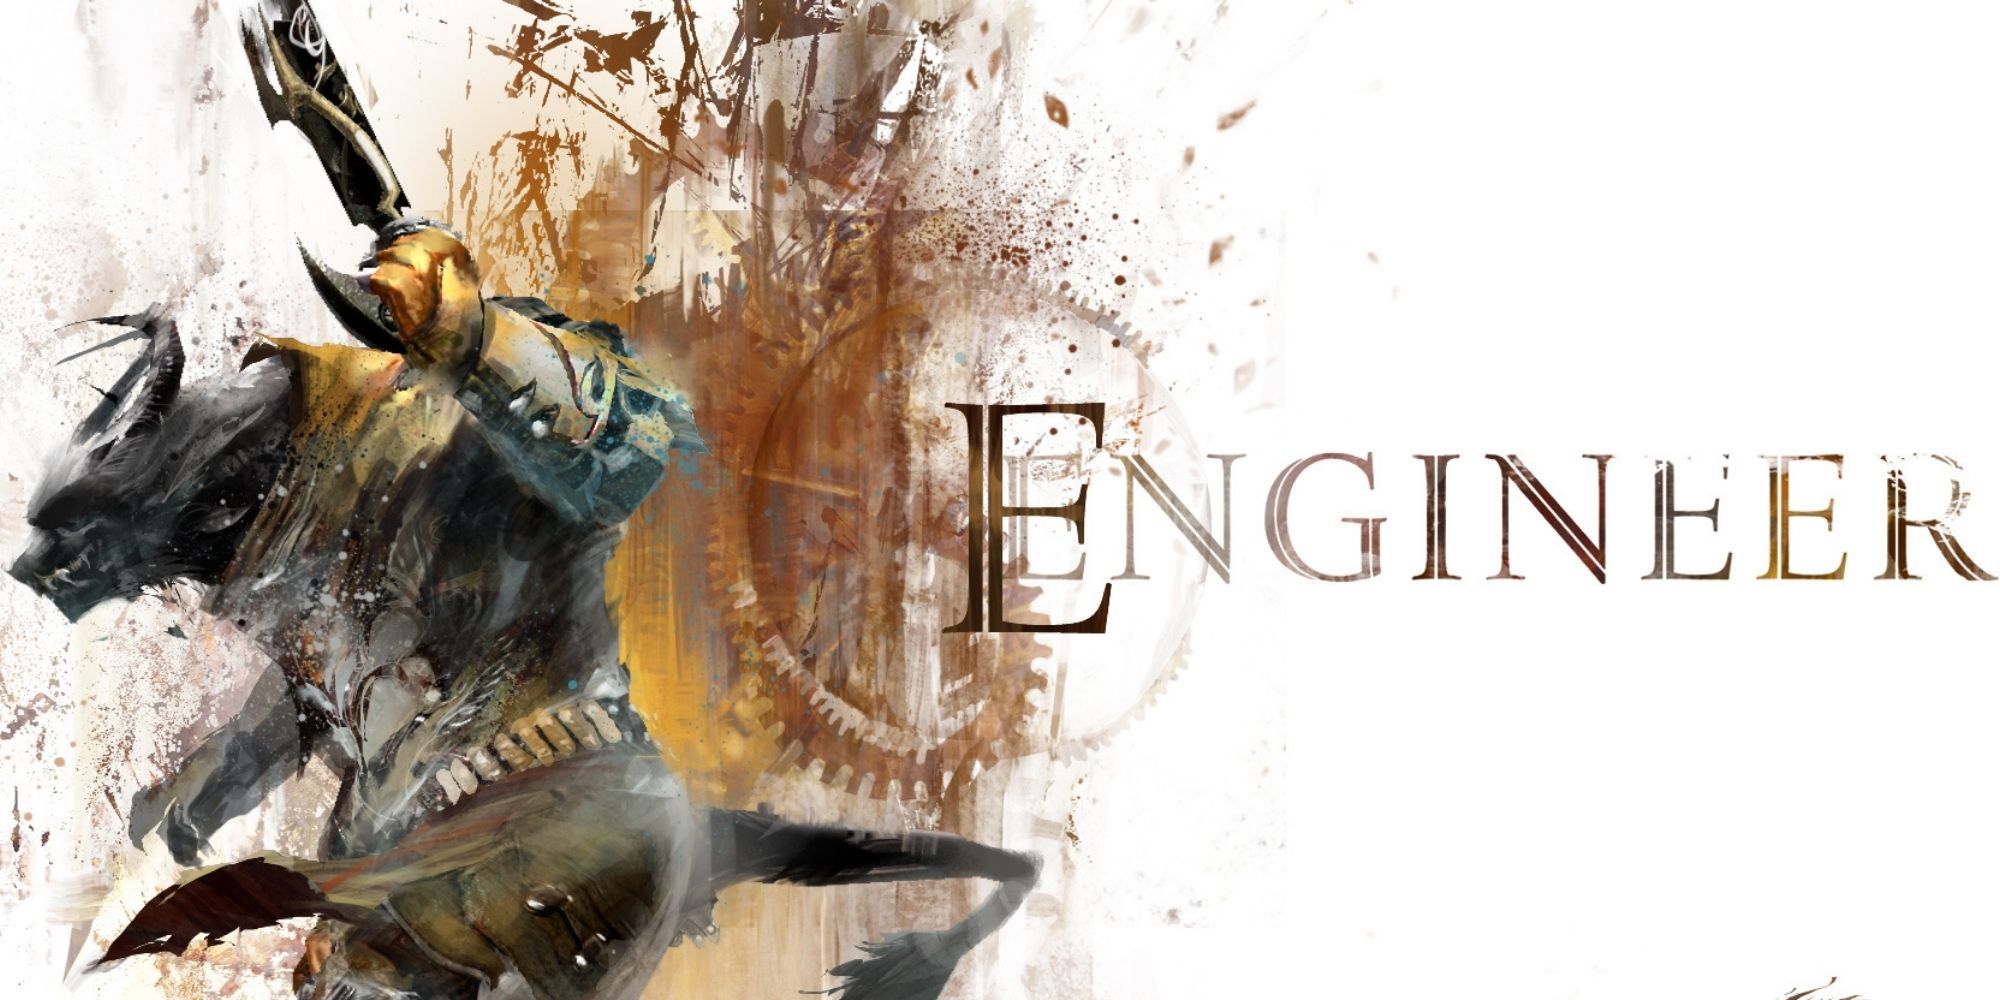 GW2 Wallpaper with art for Engineer Class